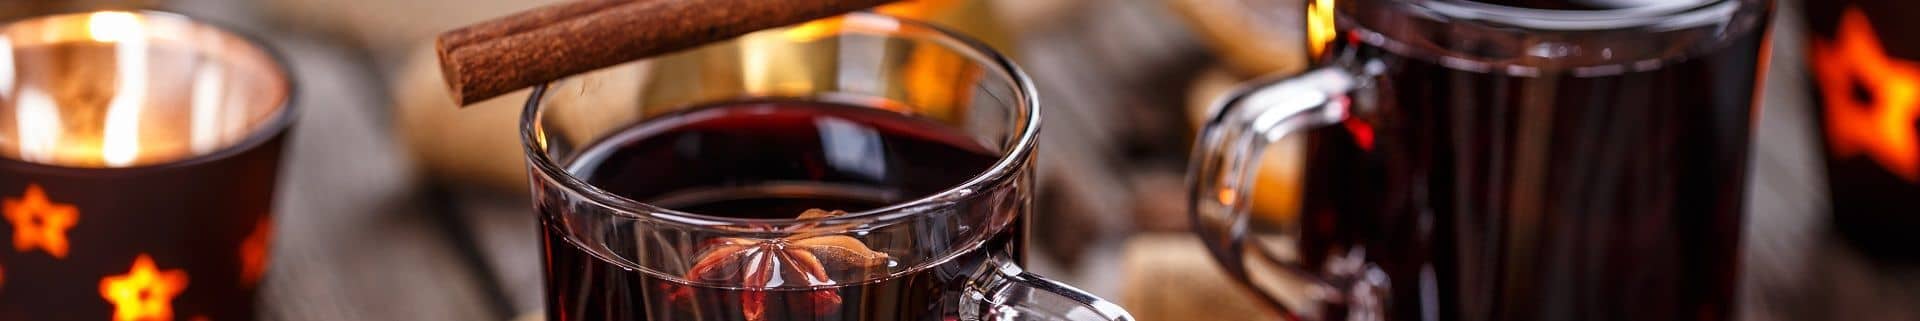 This is a delicious recipe for Christmas Punch with Port. The Port wine, cognac and citrus fruits combine to make Christmas in a glass! Superb in...